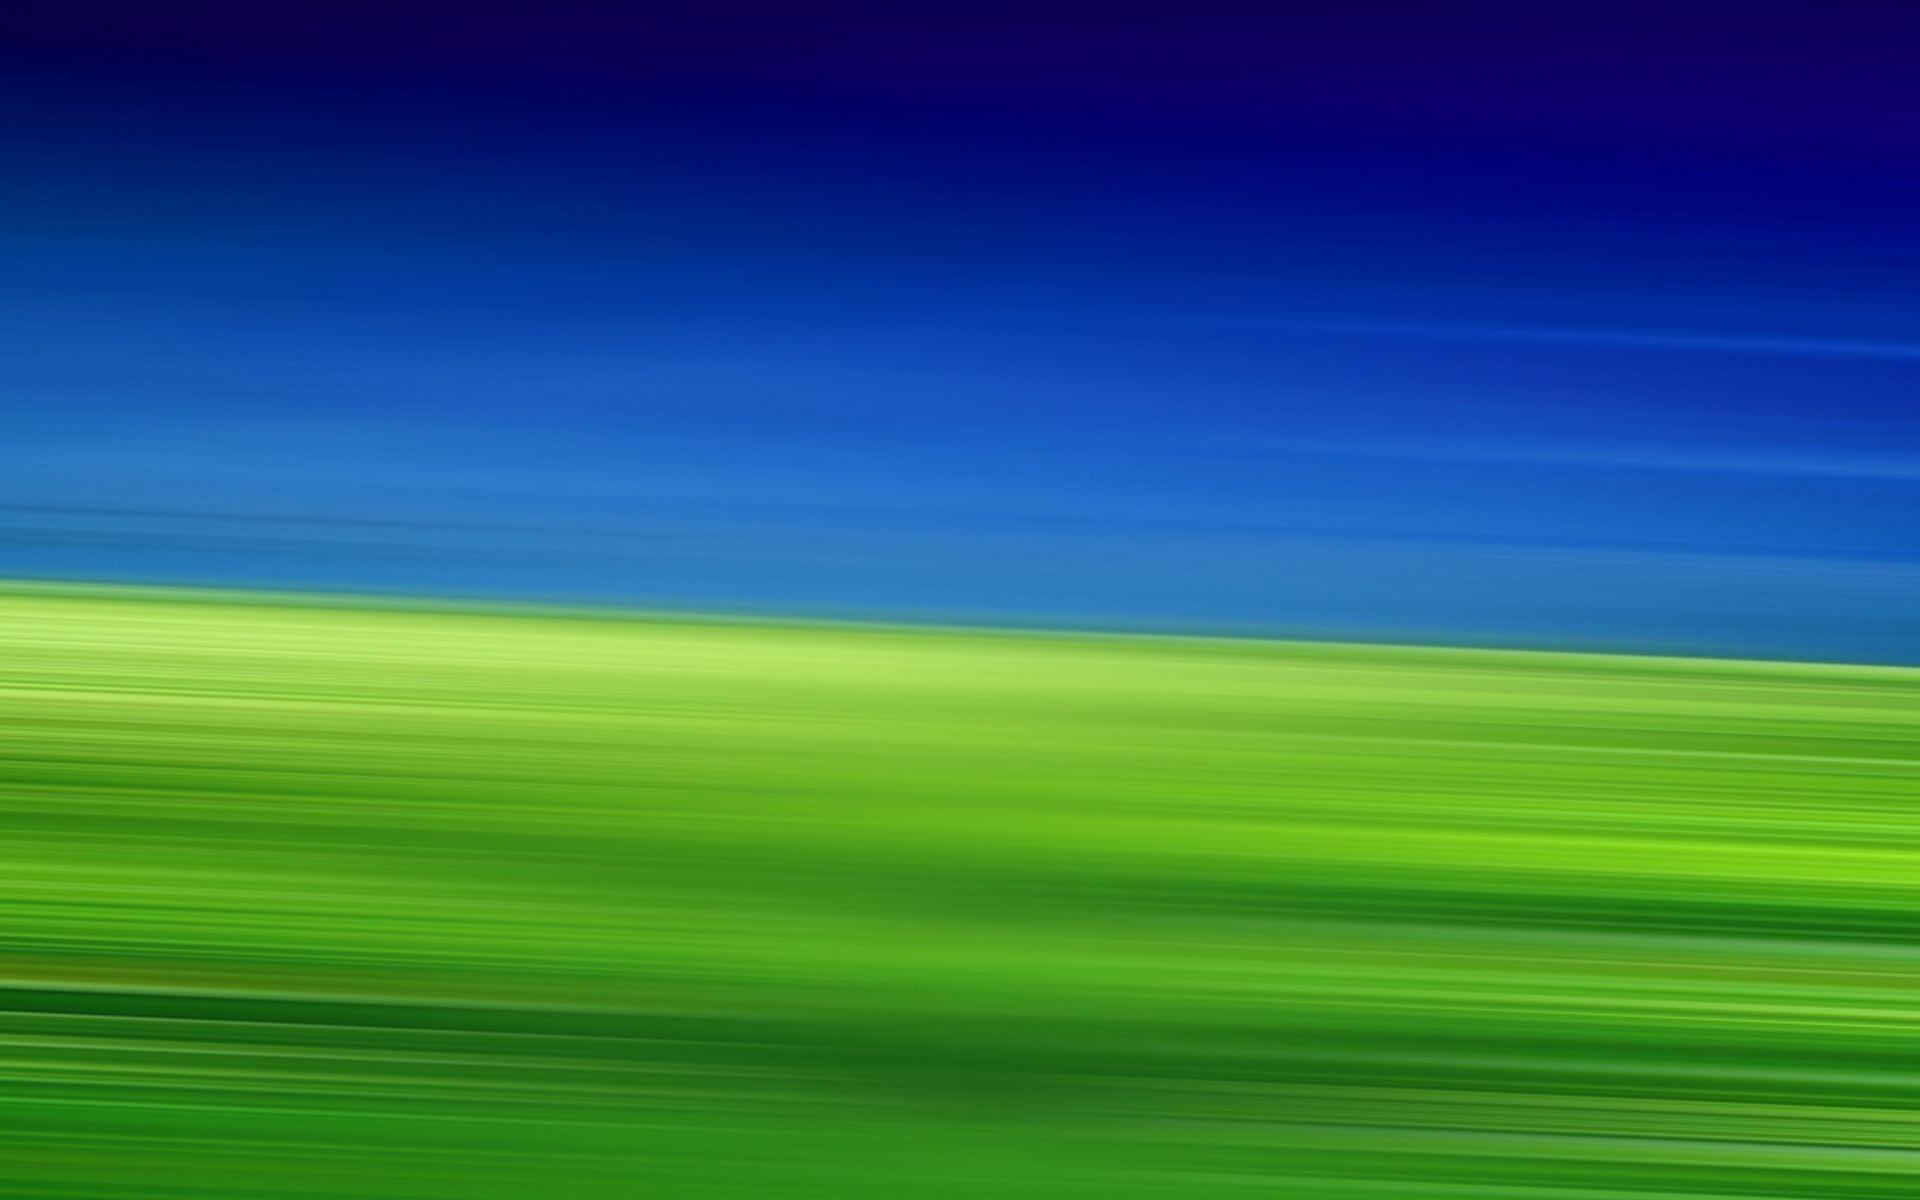 Blue And Green Wallpaper HD